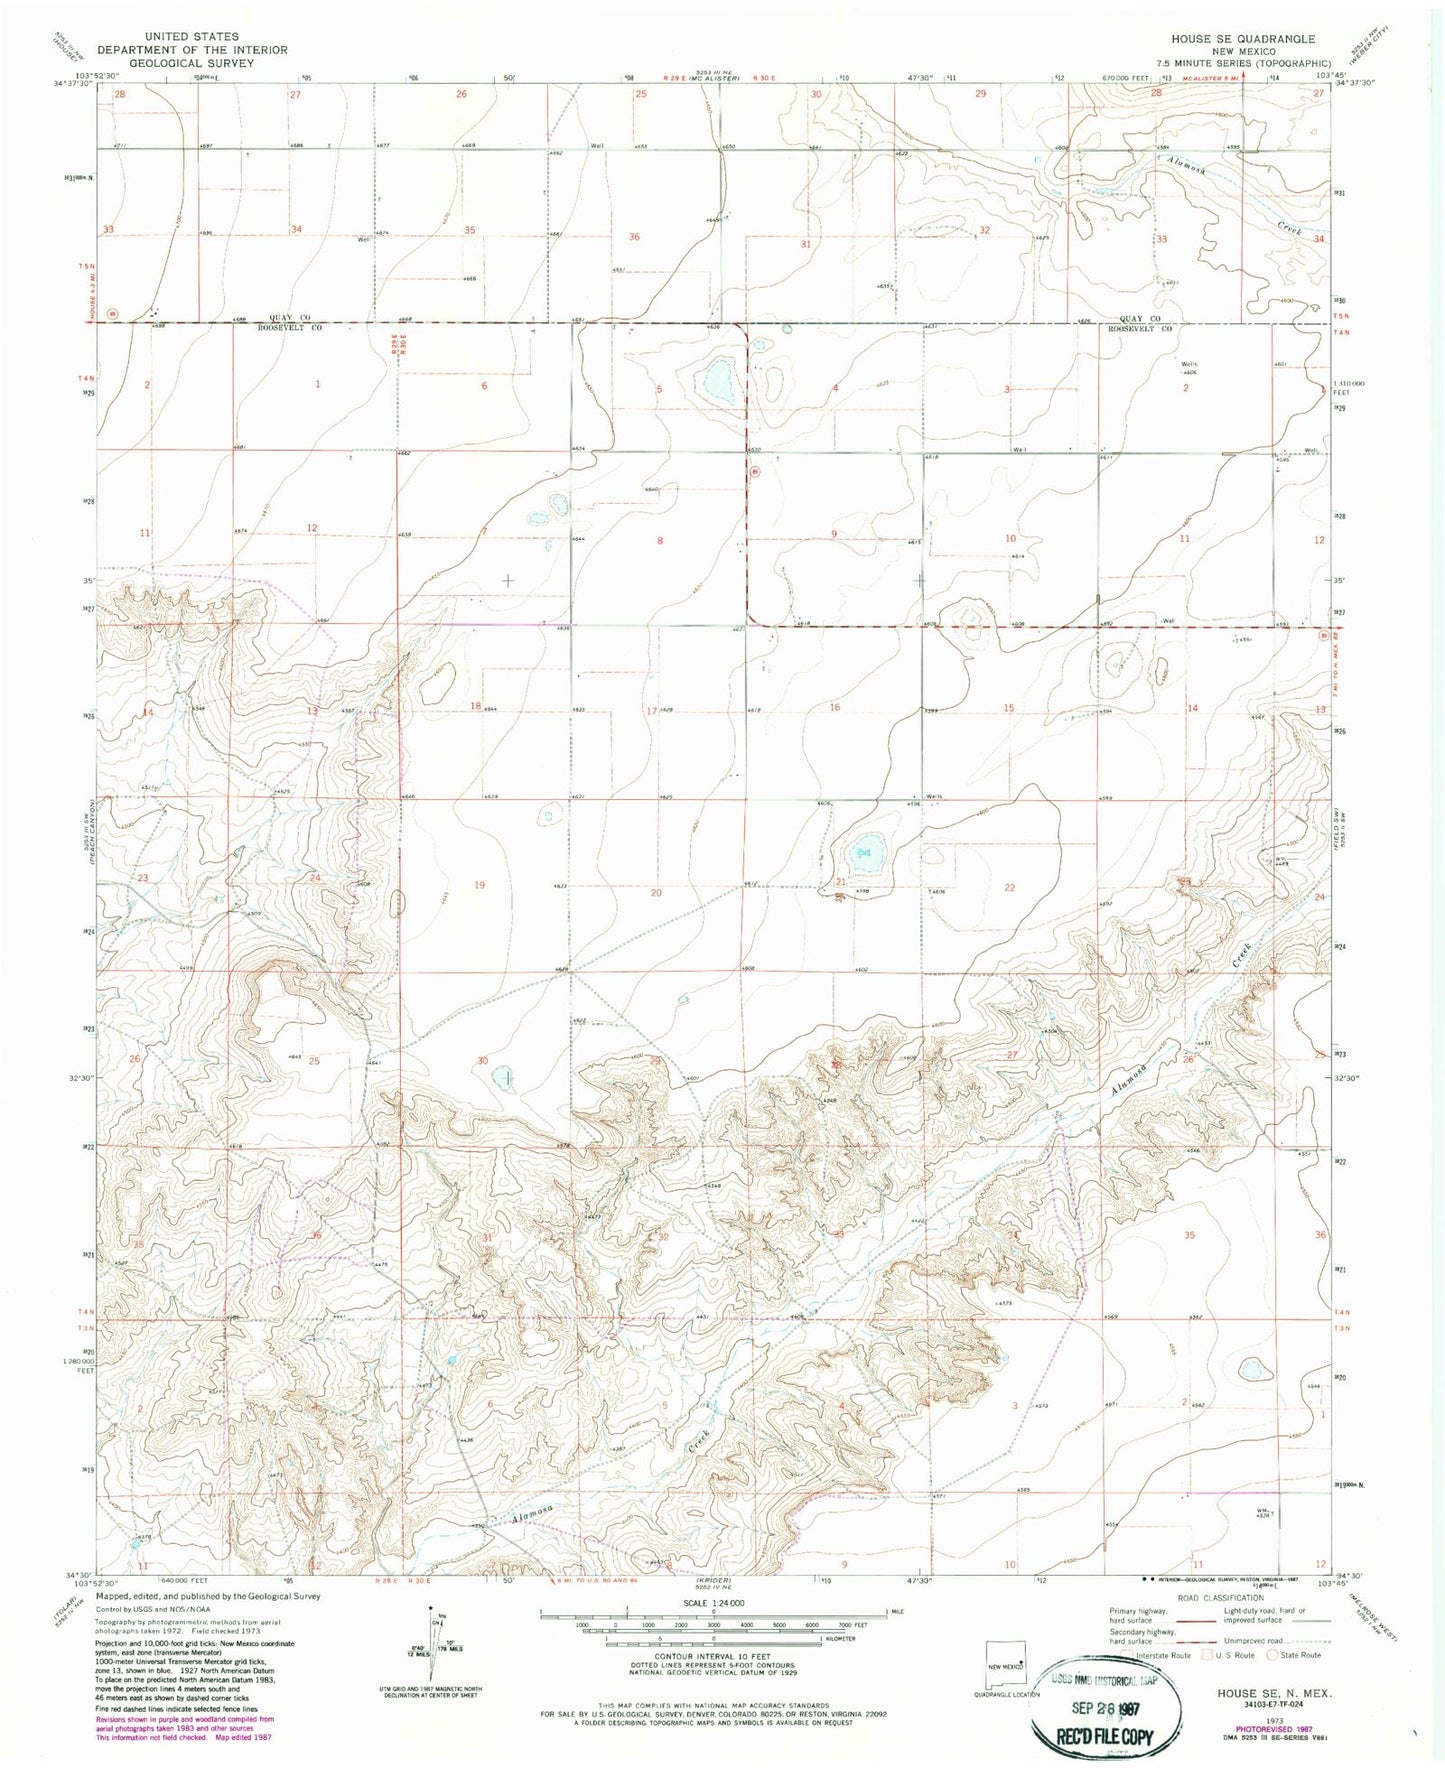 Classic USGS House SE New Mexico 7.5'x7.5' Topo Map Image